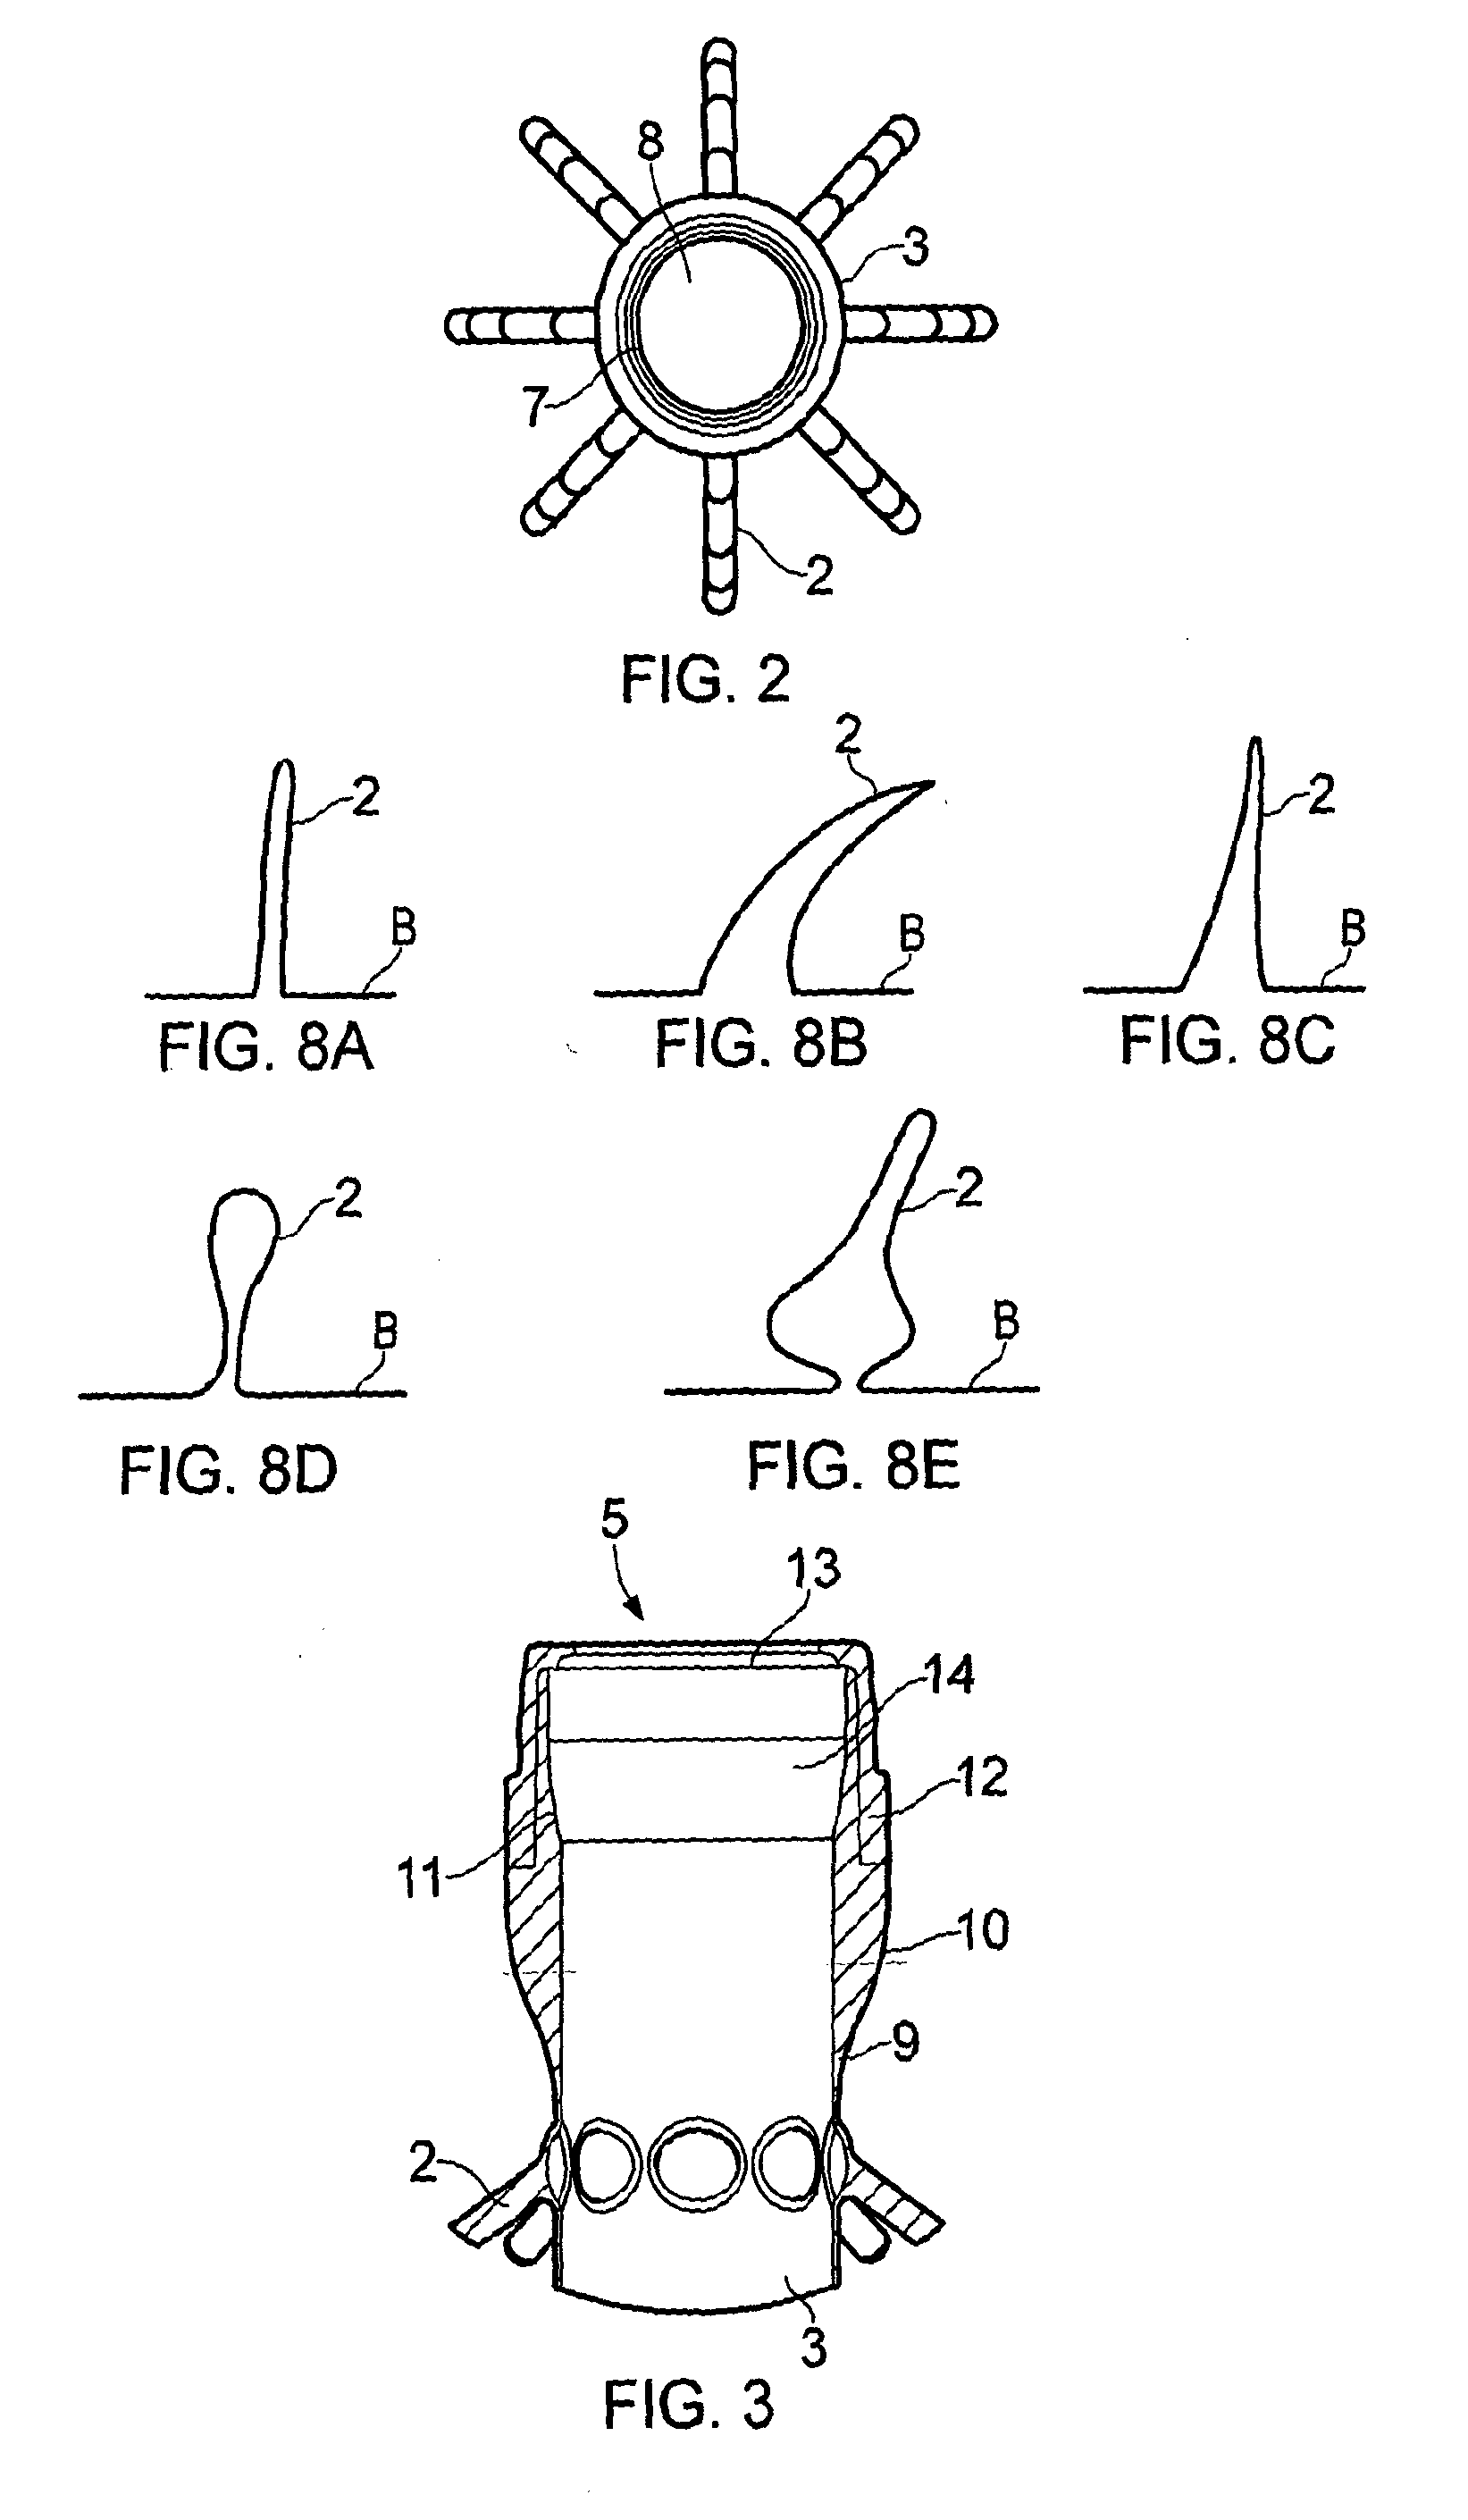 Covering for a medical scoping device